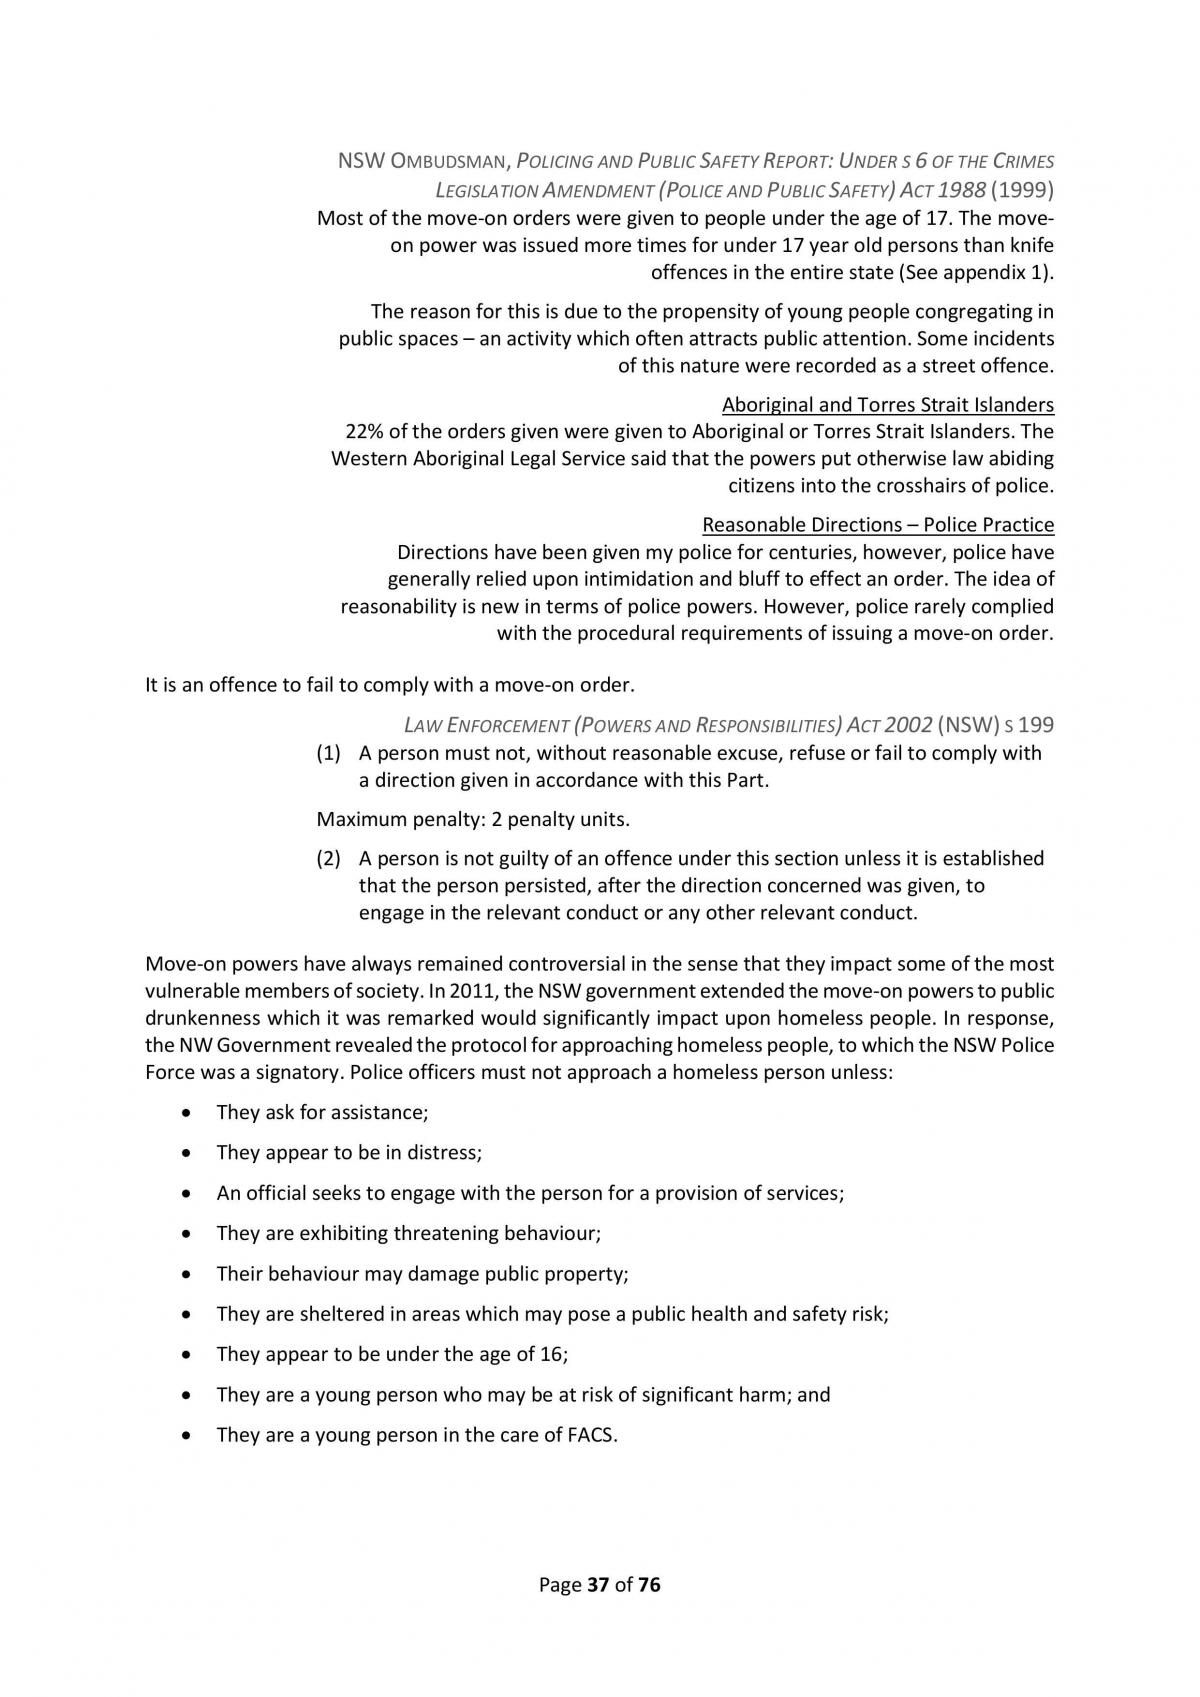 LAWS1021 Course Notes - Page 38